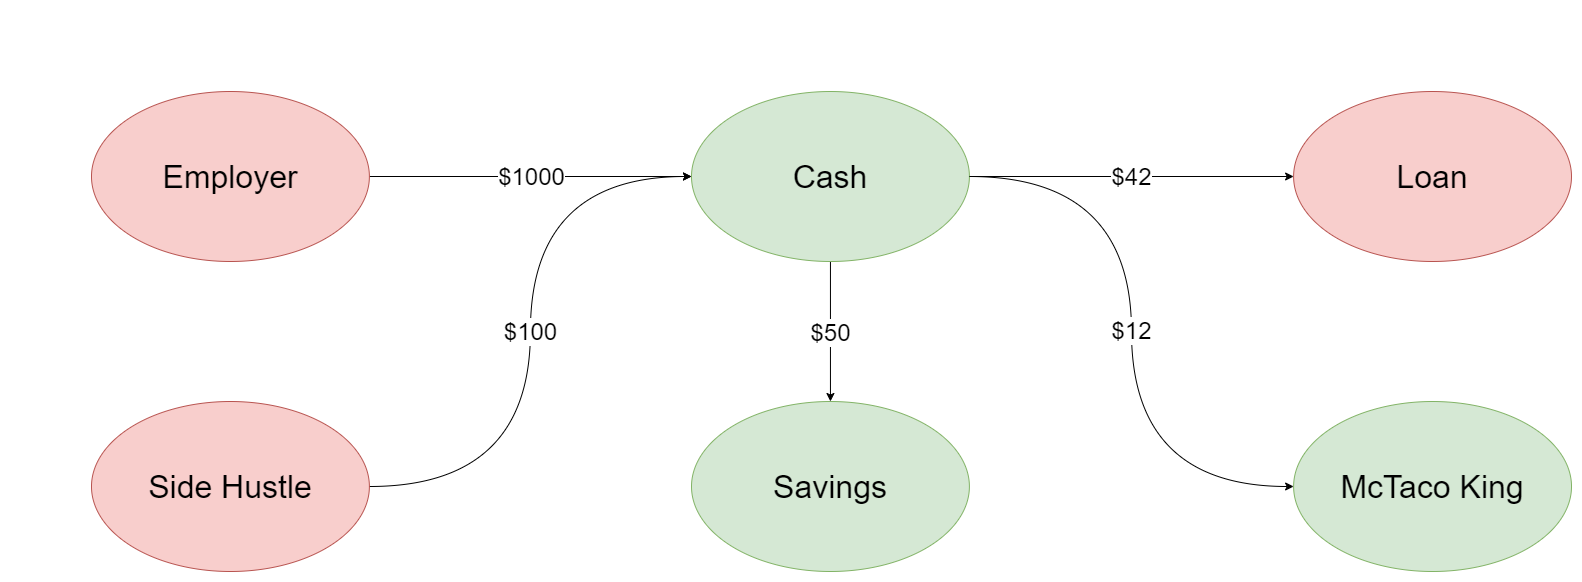 A graph of six nodes, labeled Employer, Side Hustle, Cash, Savings, McTaco King and Loan, with an arrow between Employer and Cash labeled $1000, an arrow between Side Hustle and Cash labeled $100, an arrow between Cash and Savings labeled $50, an arrow between Cash and McTaco King labeled $12, and an arrow between Cash and Loan labeled $42